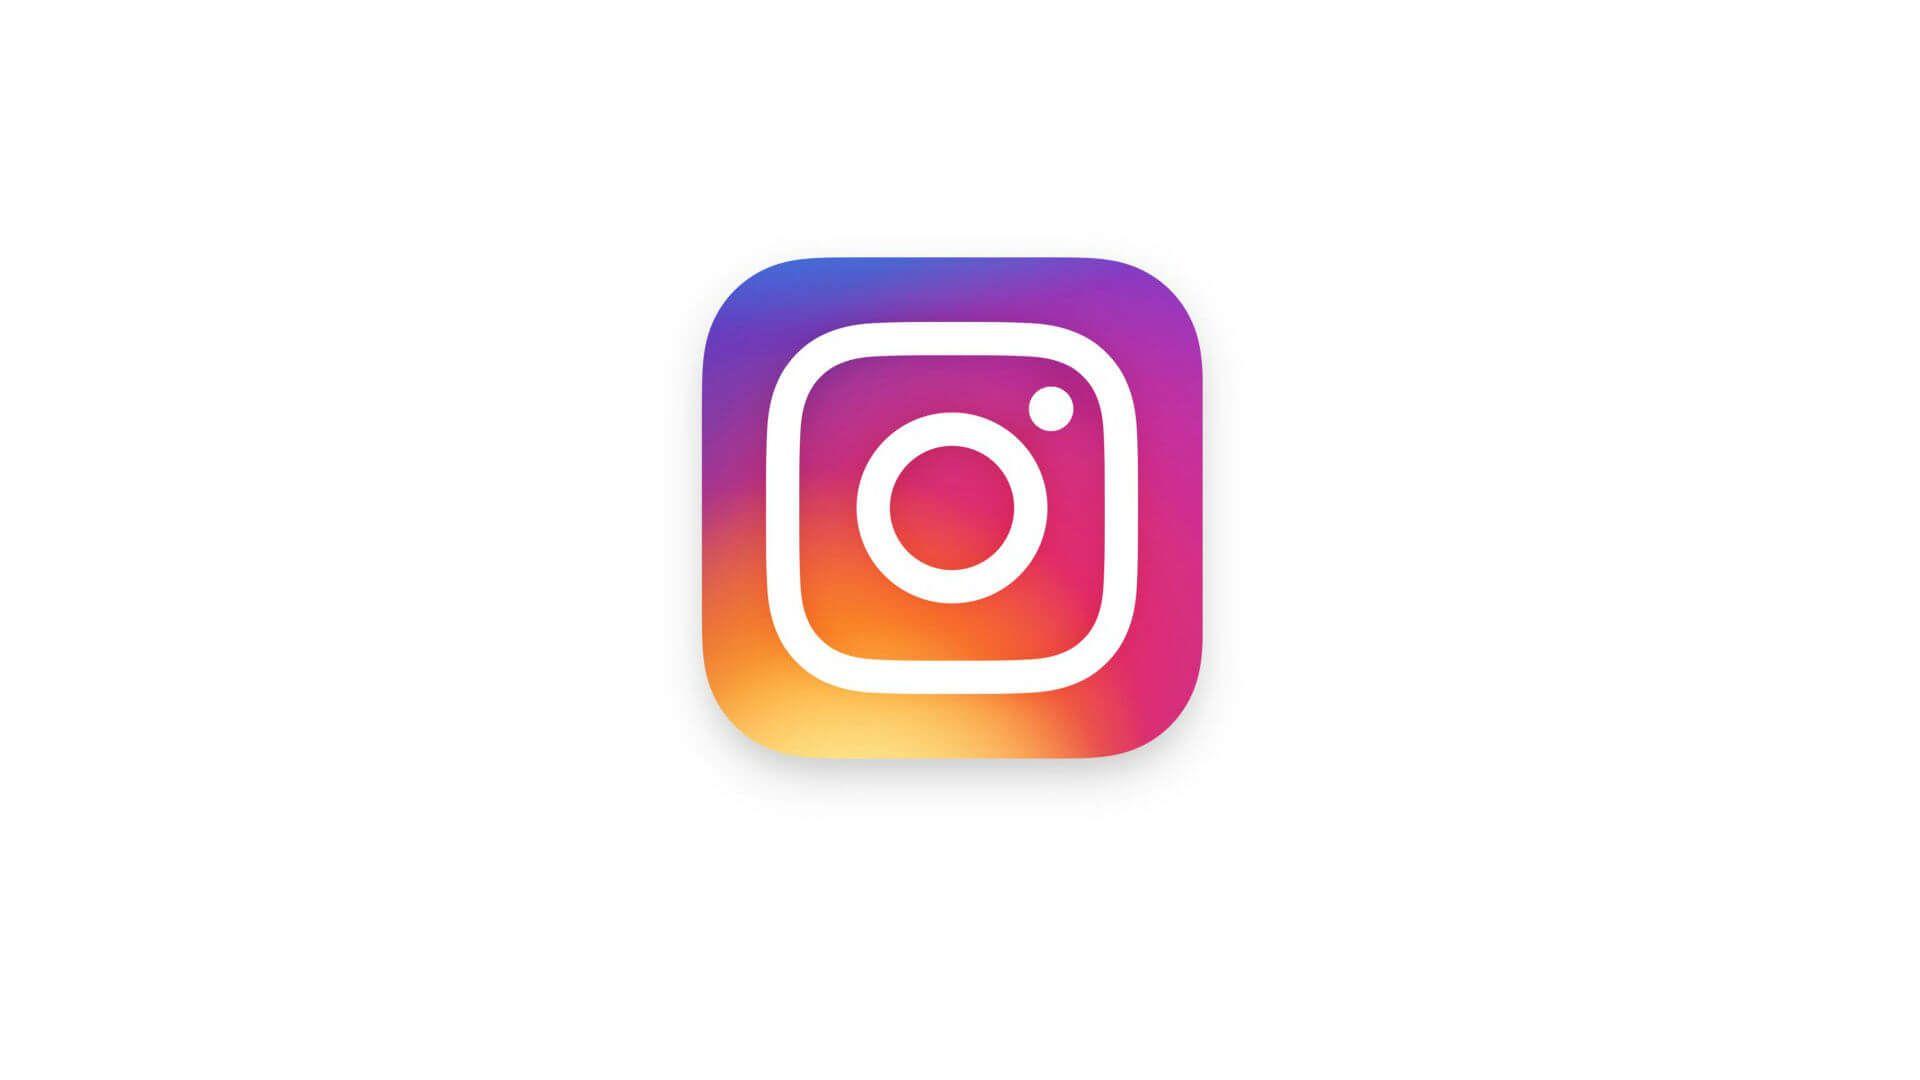 New Mobile Logo - Instagram unveils new look for its logo, mobile apps